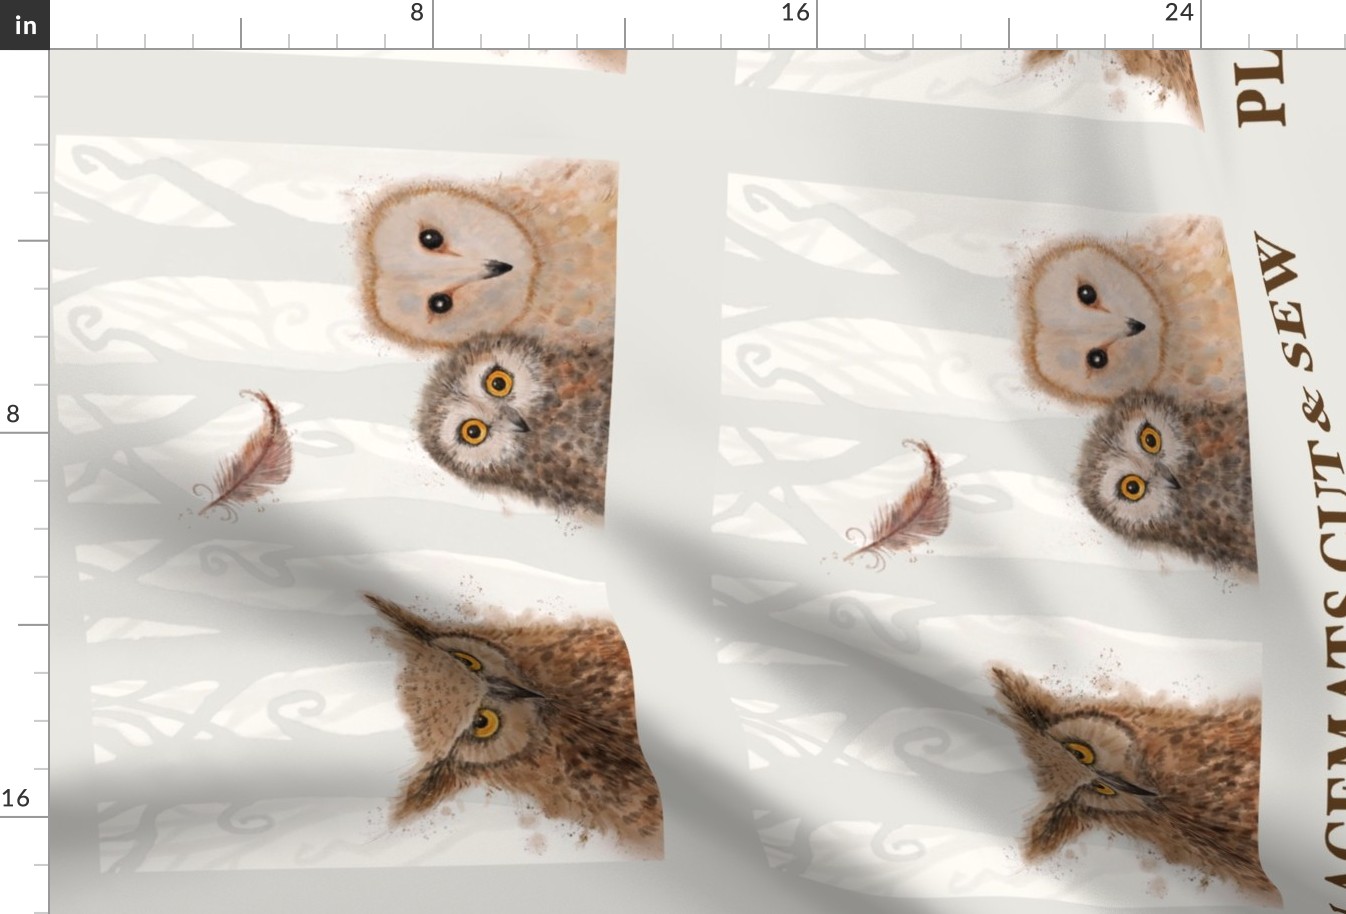 Owl Placemats